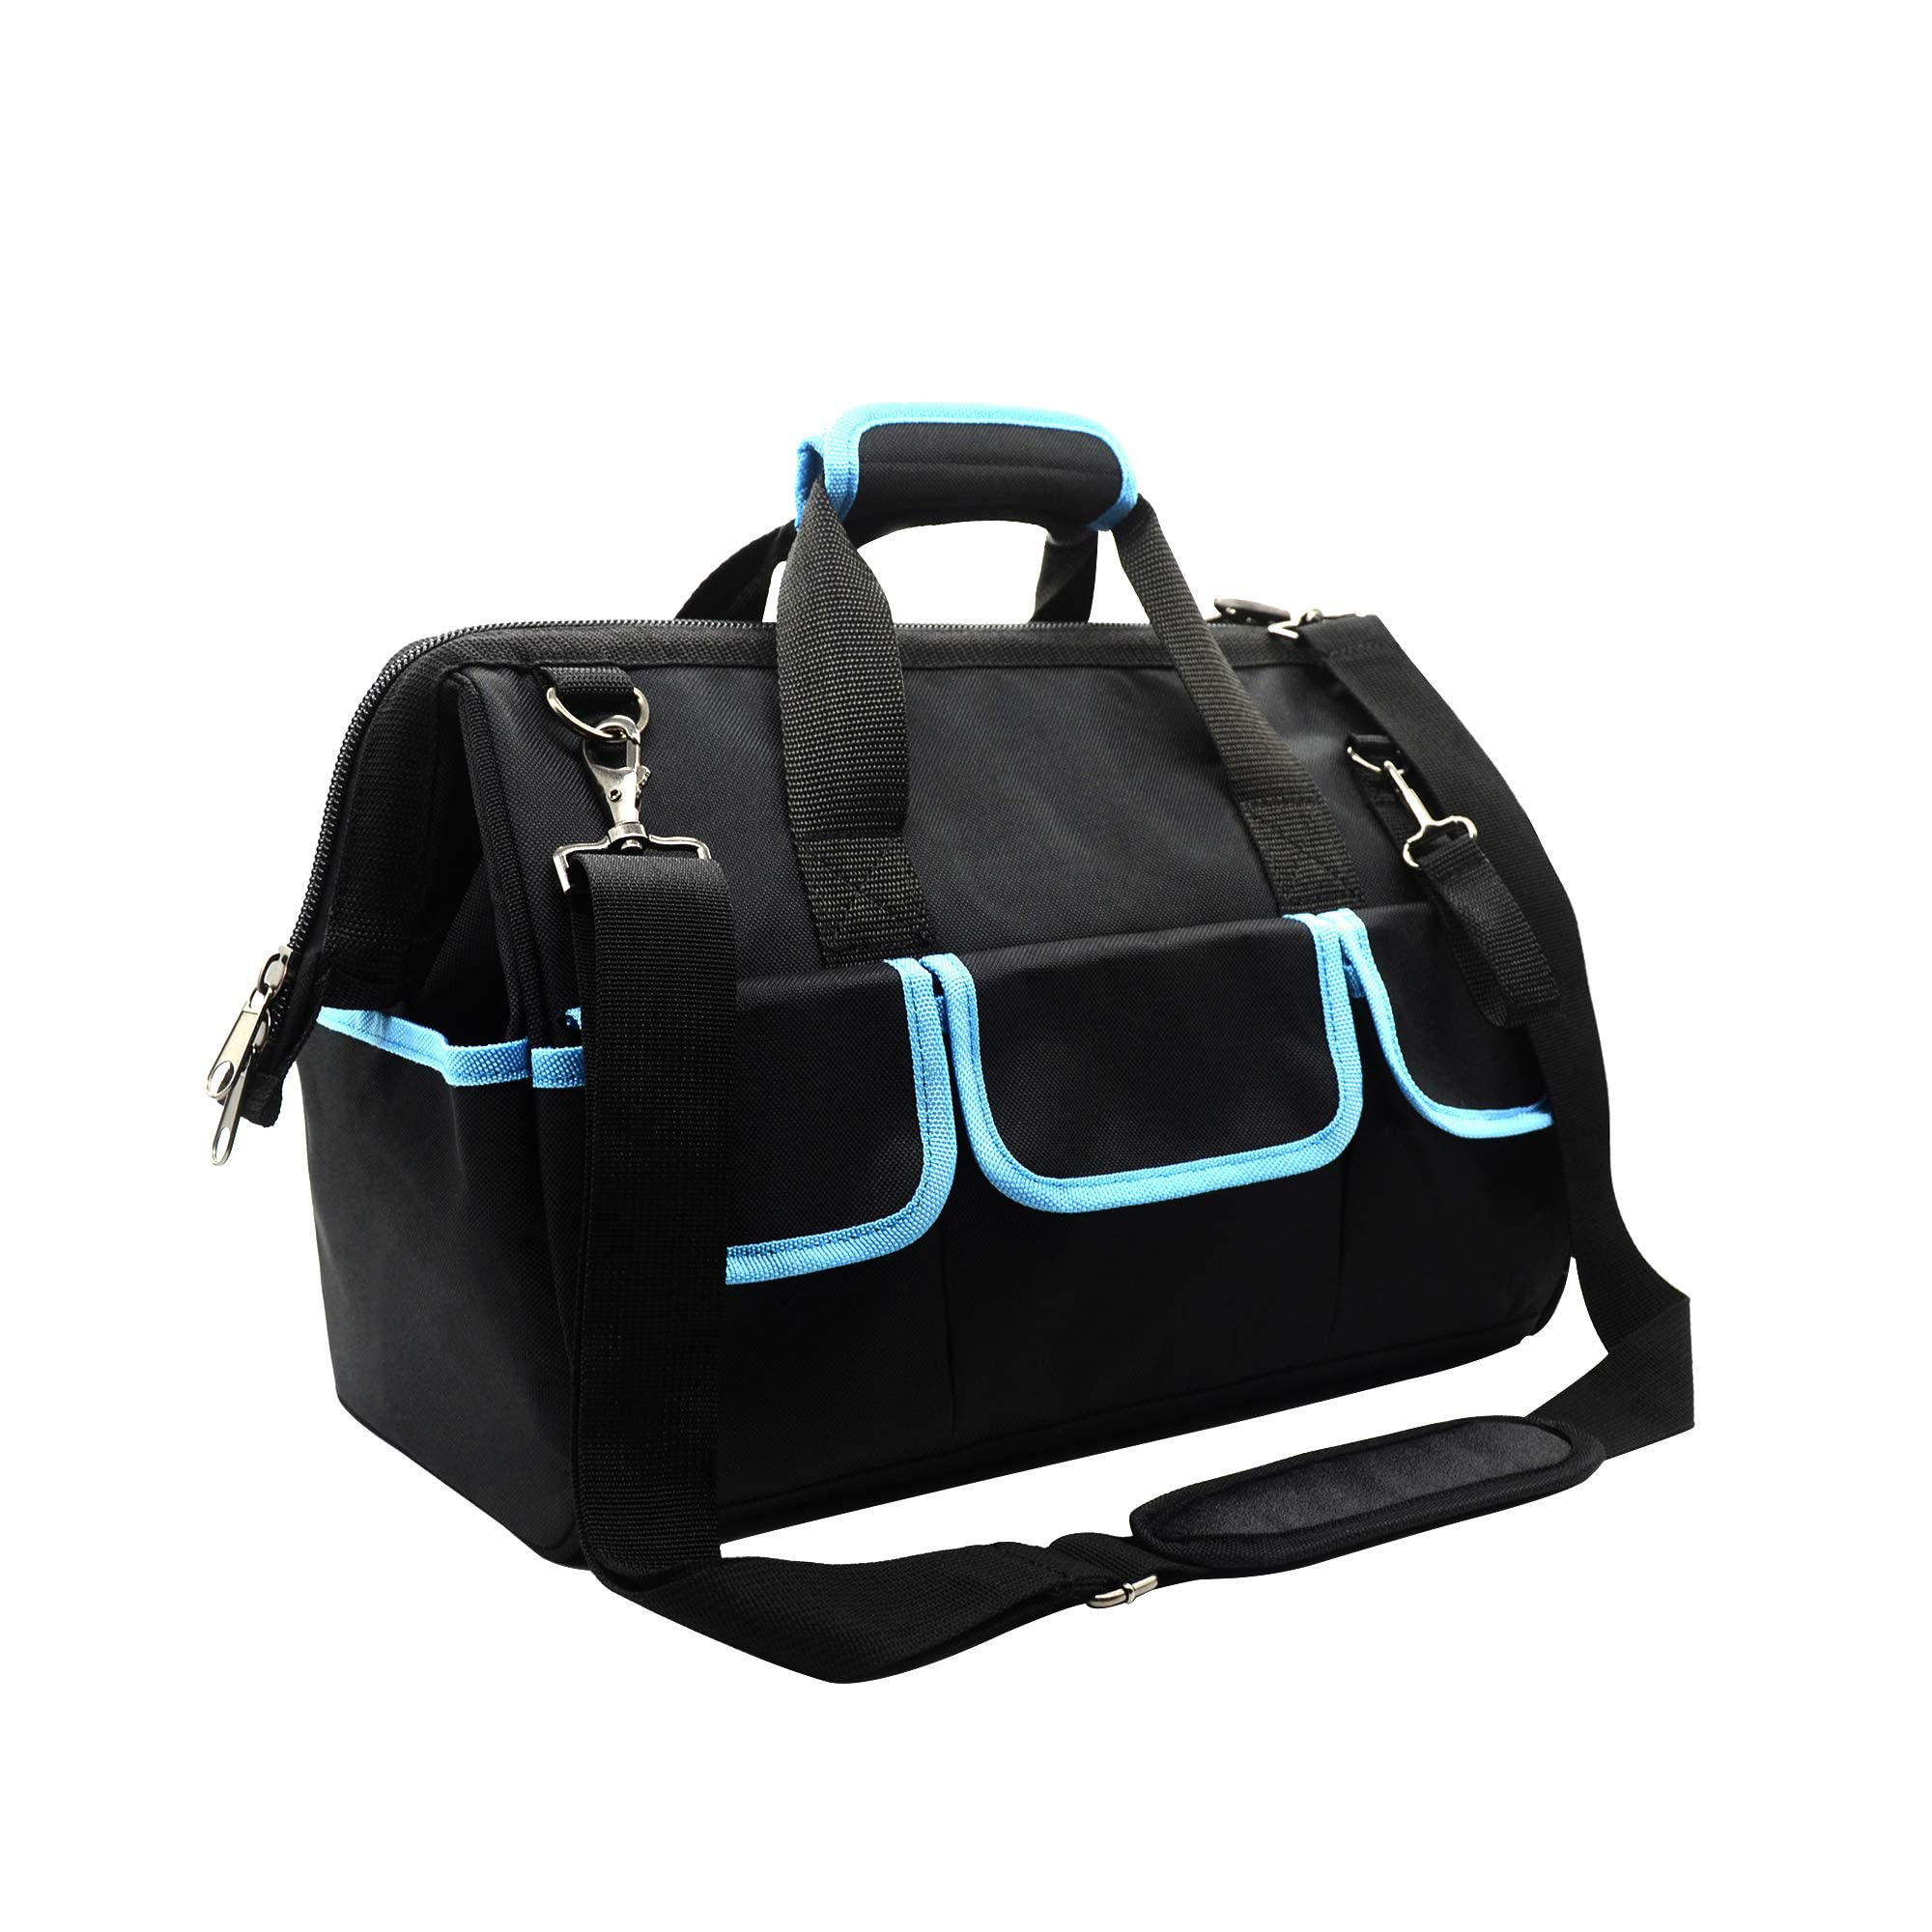 Men’s Kit Portable Wide-mouth kit with zipper storage bag Tote,15 inches (about 38.1 cm), blue can be customized